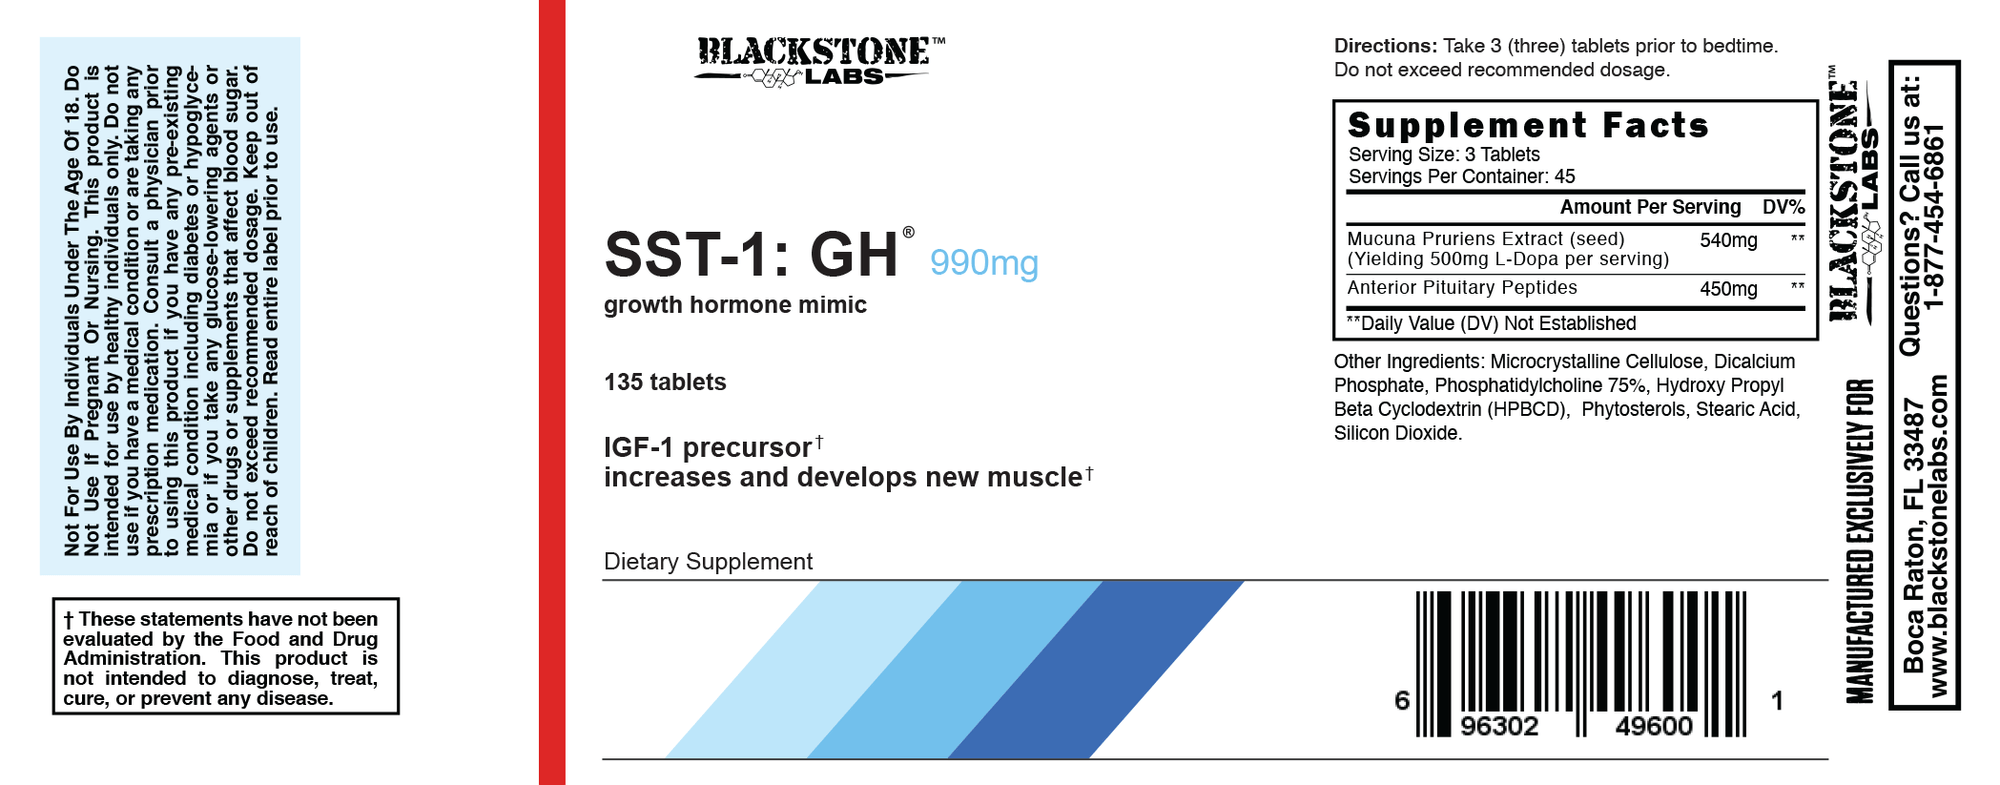 Blackstone Labs SST-1: GH 990mg facts